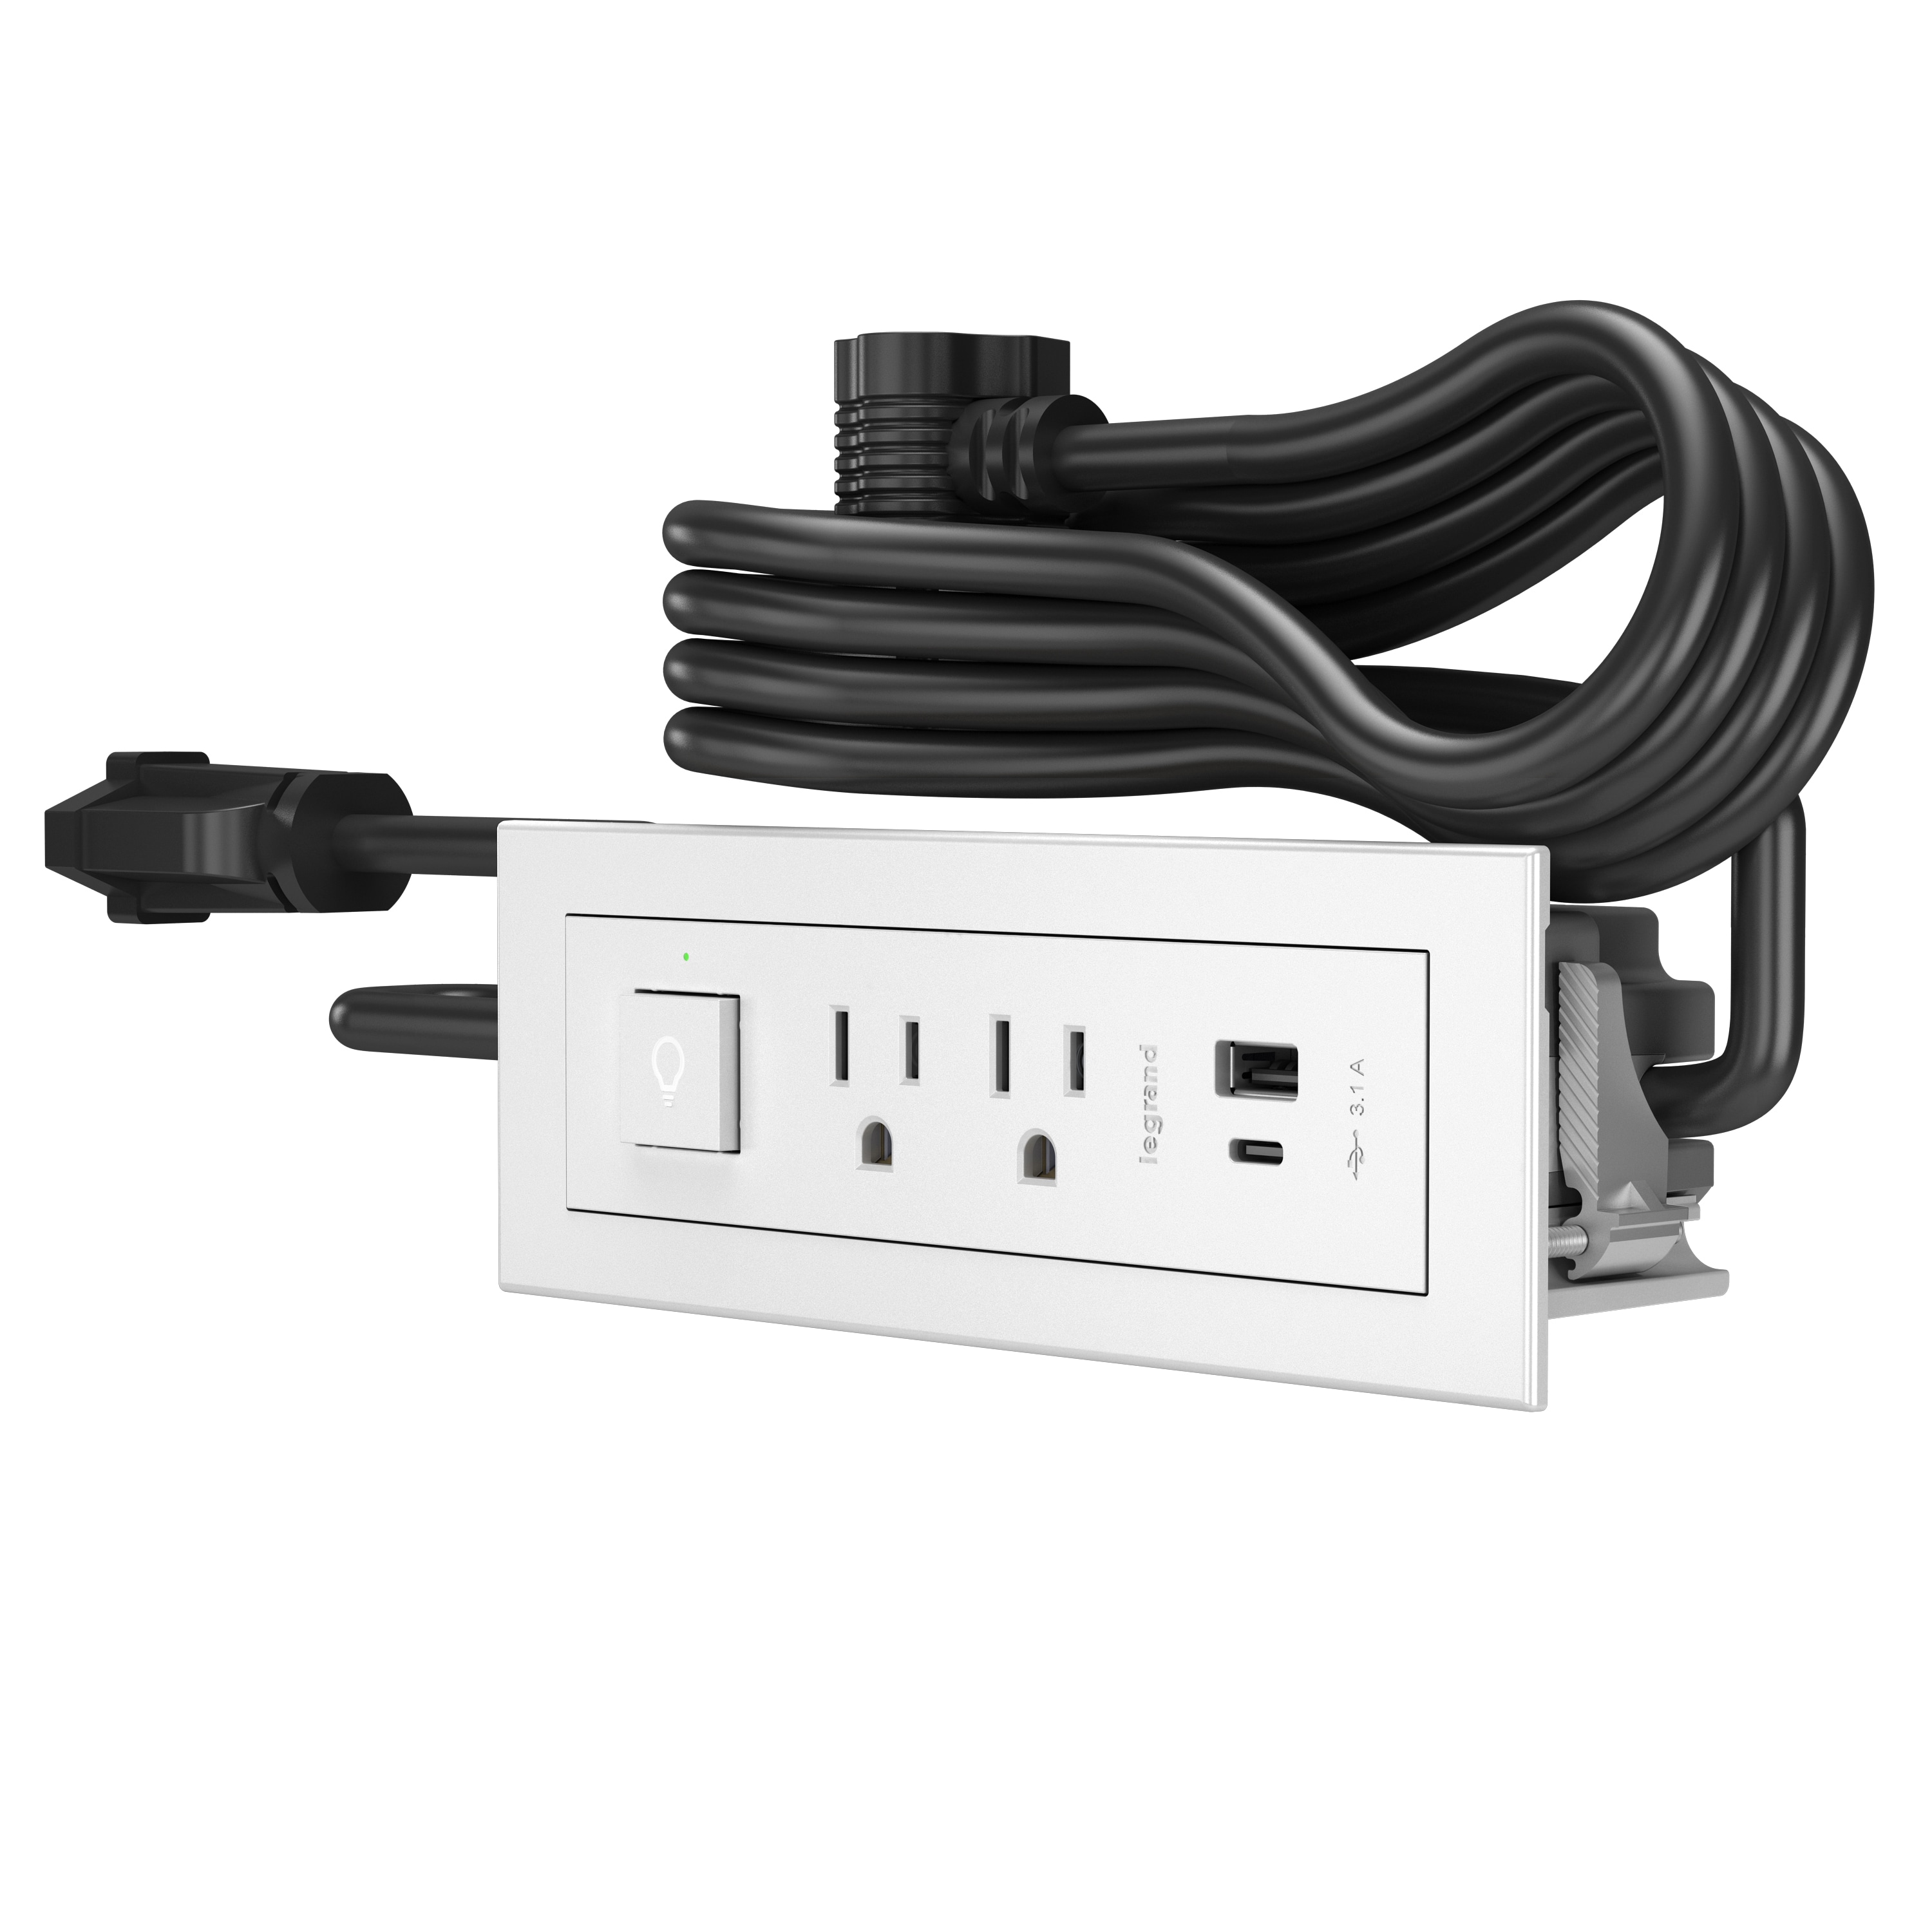 Link2Home 10 Amps Tamper Resistant Combination Outlet with USB